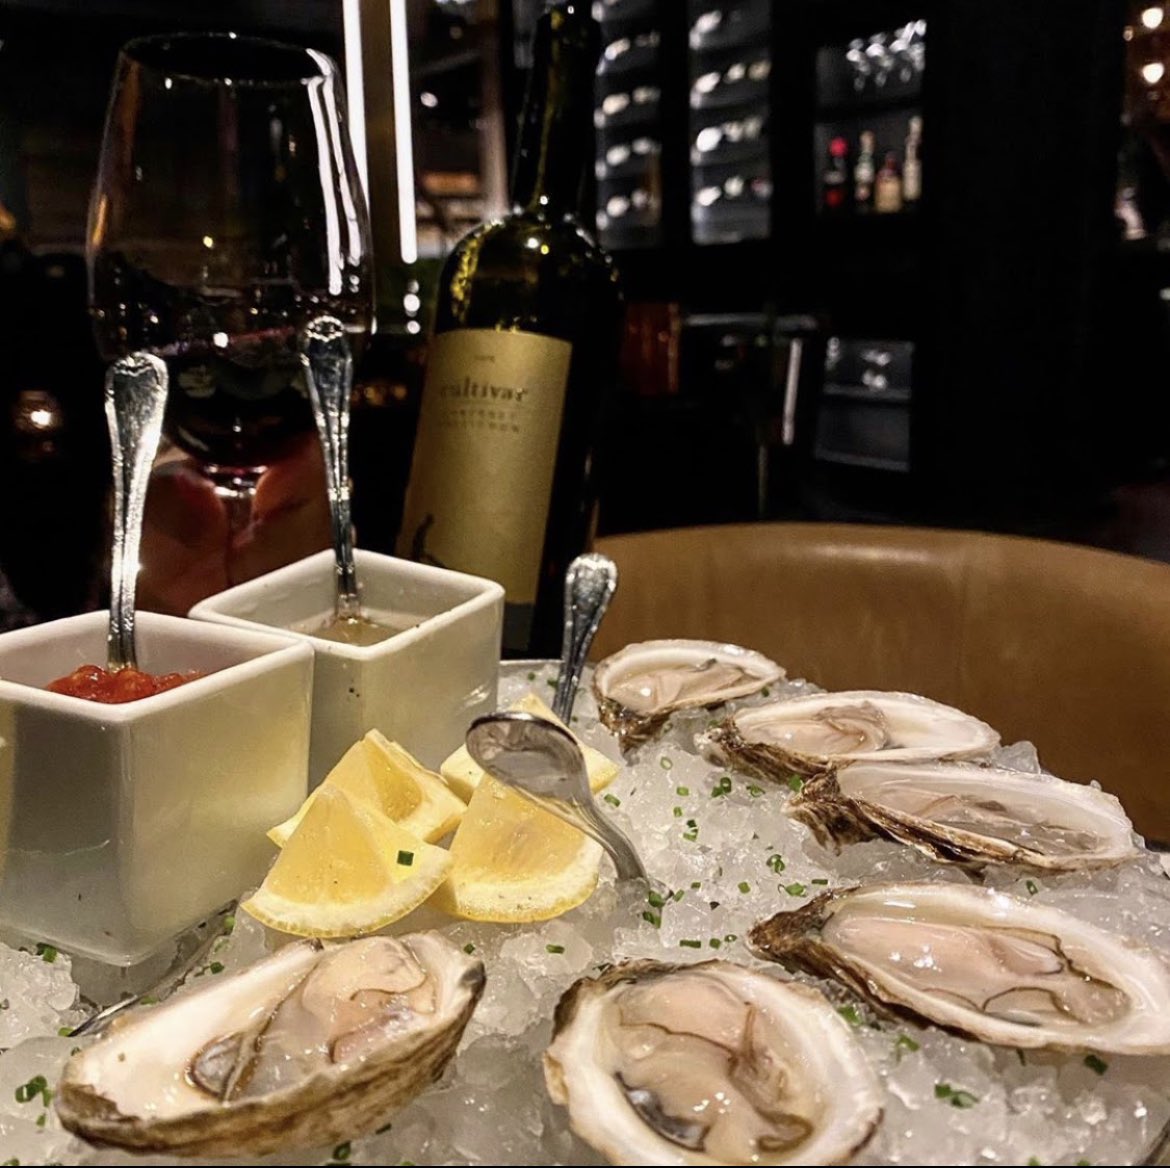 Happy National Oyster 🦪 Day! We ❤️ this! A perfect combination 🦪 & 🍷!
📷 @travelinnjenn 
@gtprimesteakhouse 🥩 in Chicago
Cheers! 🍷
What do you like with your oysters?
#oysterpairing #oysterday #eatmoreoysters #mywineanddine #mywinelife #NationalOysterDay #chicagofood